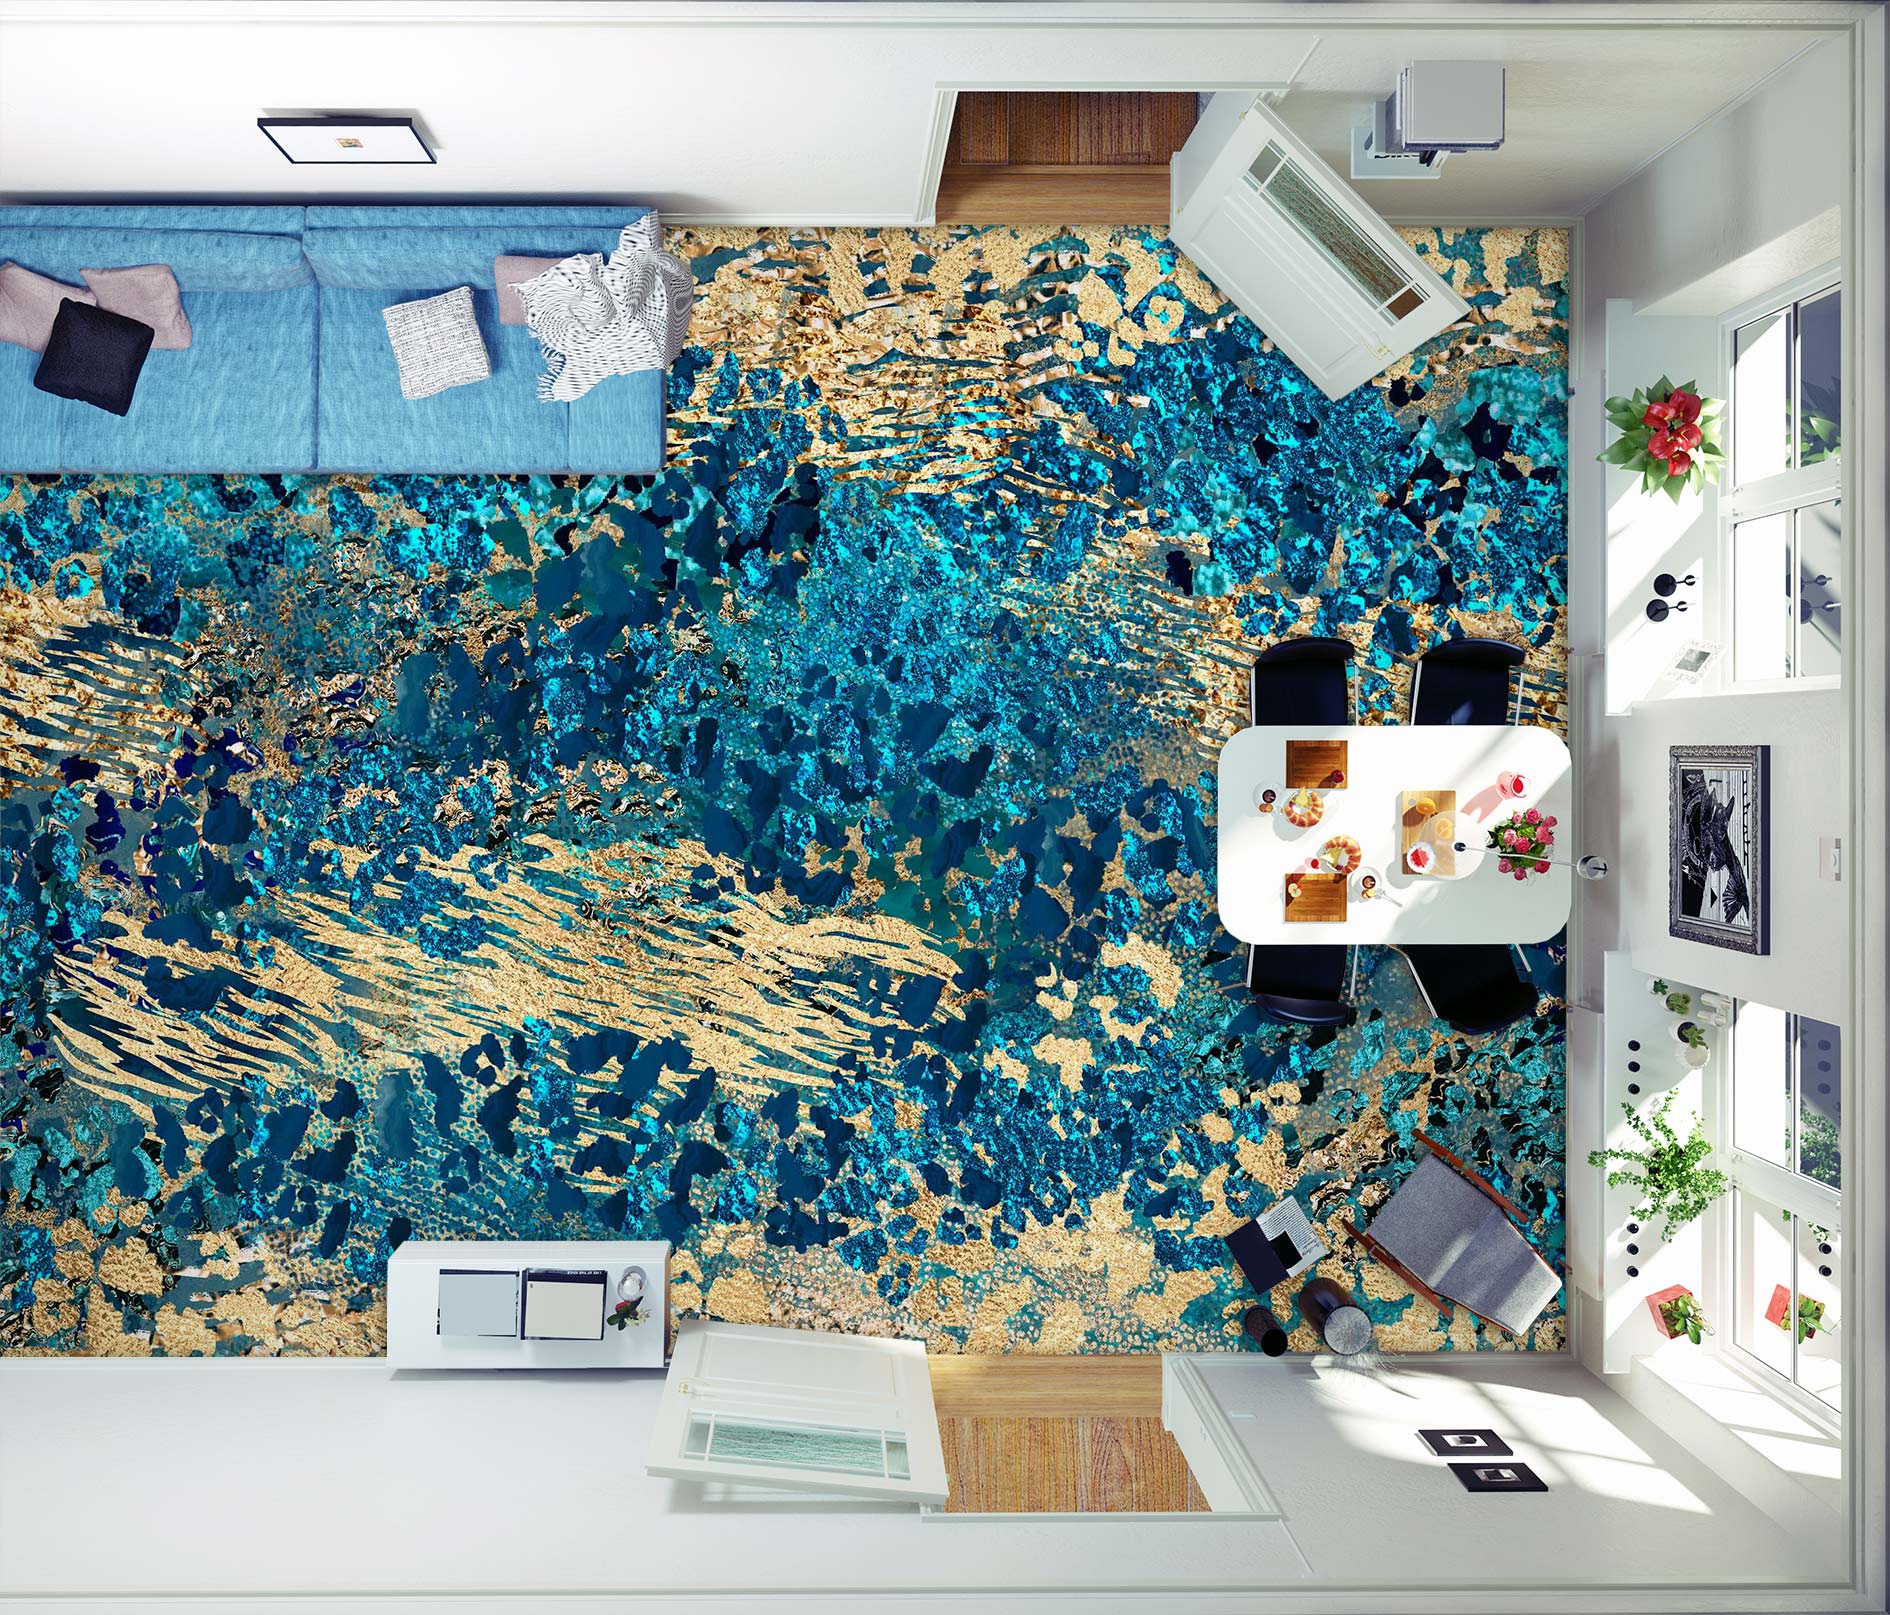 3D Blue Gold Pattern 102144 Andrea Haase Floor Mural  Wallpaper Murals Self-Adhesive Removable Print Epoxy